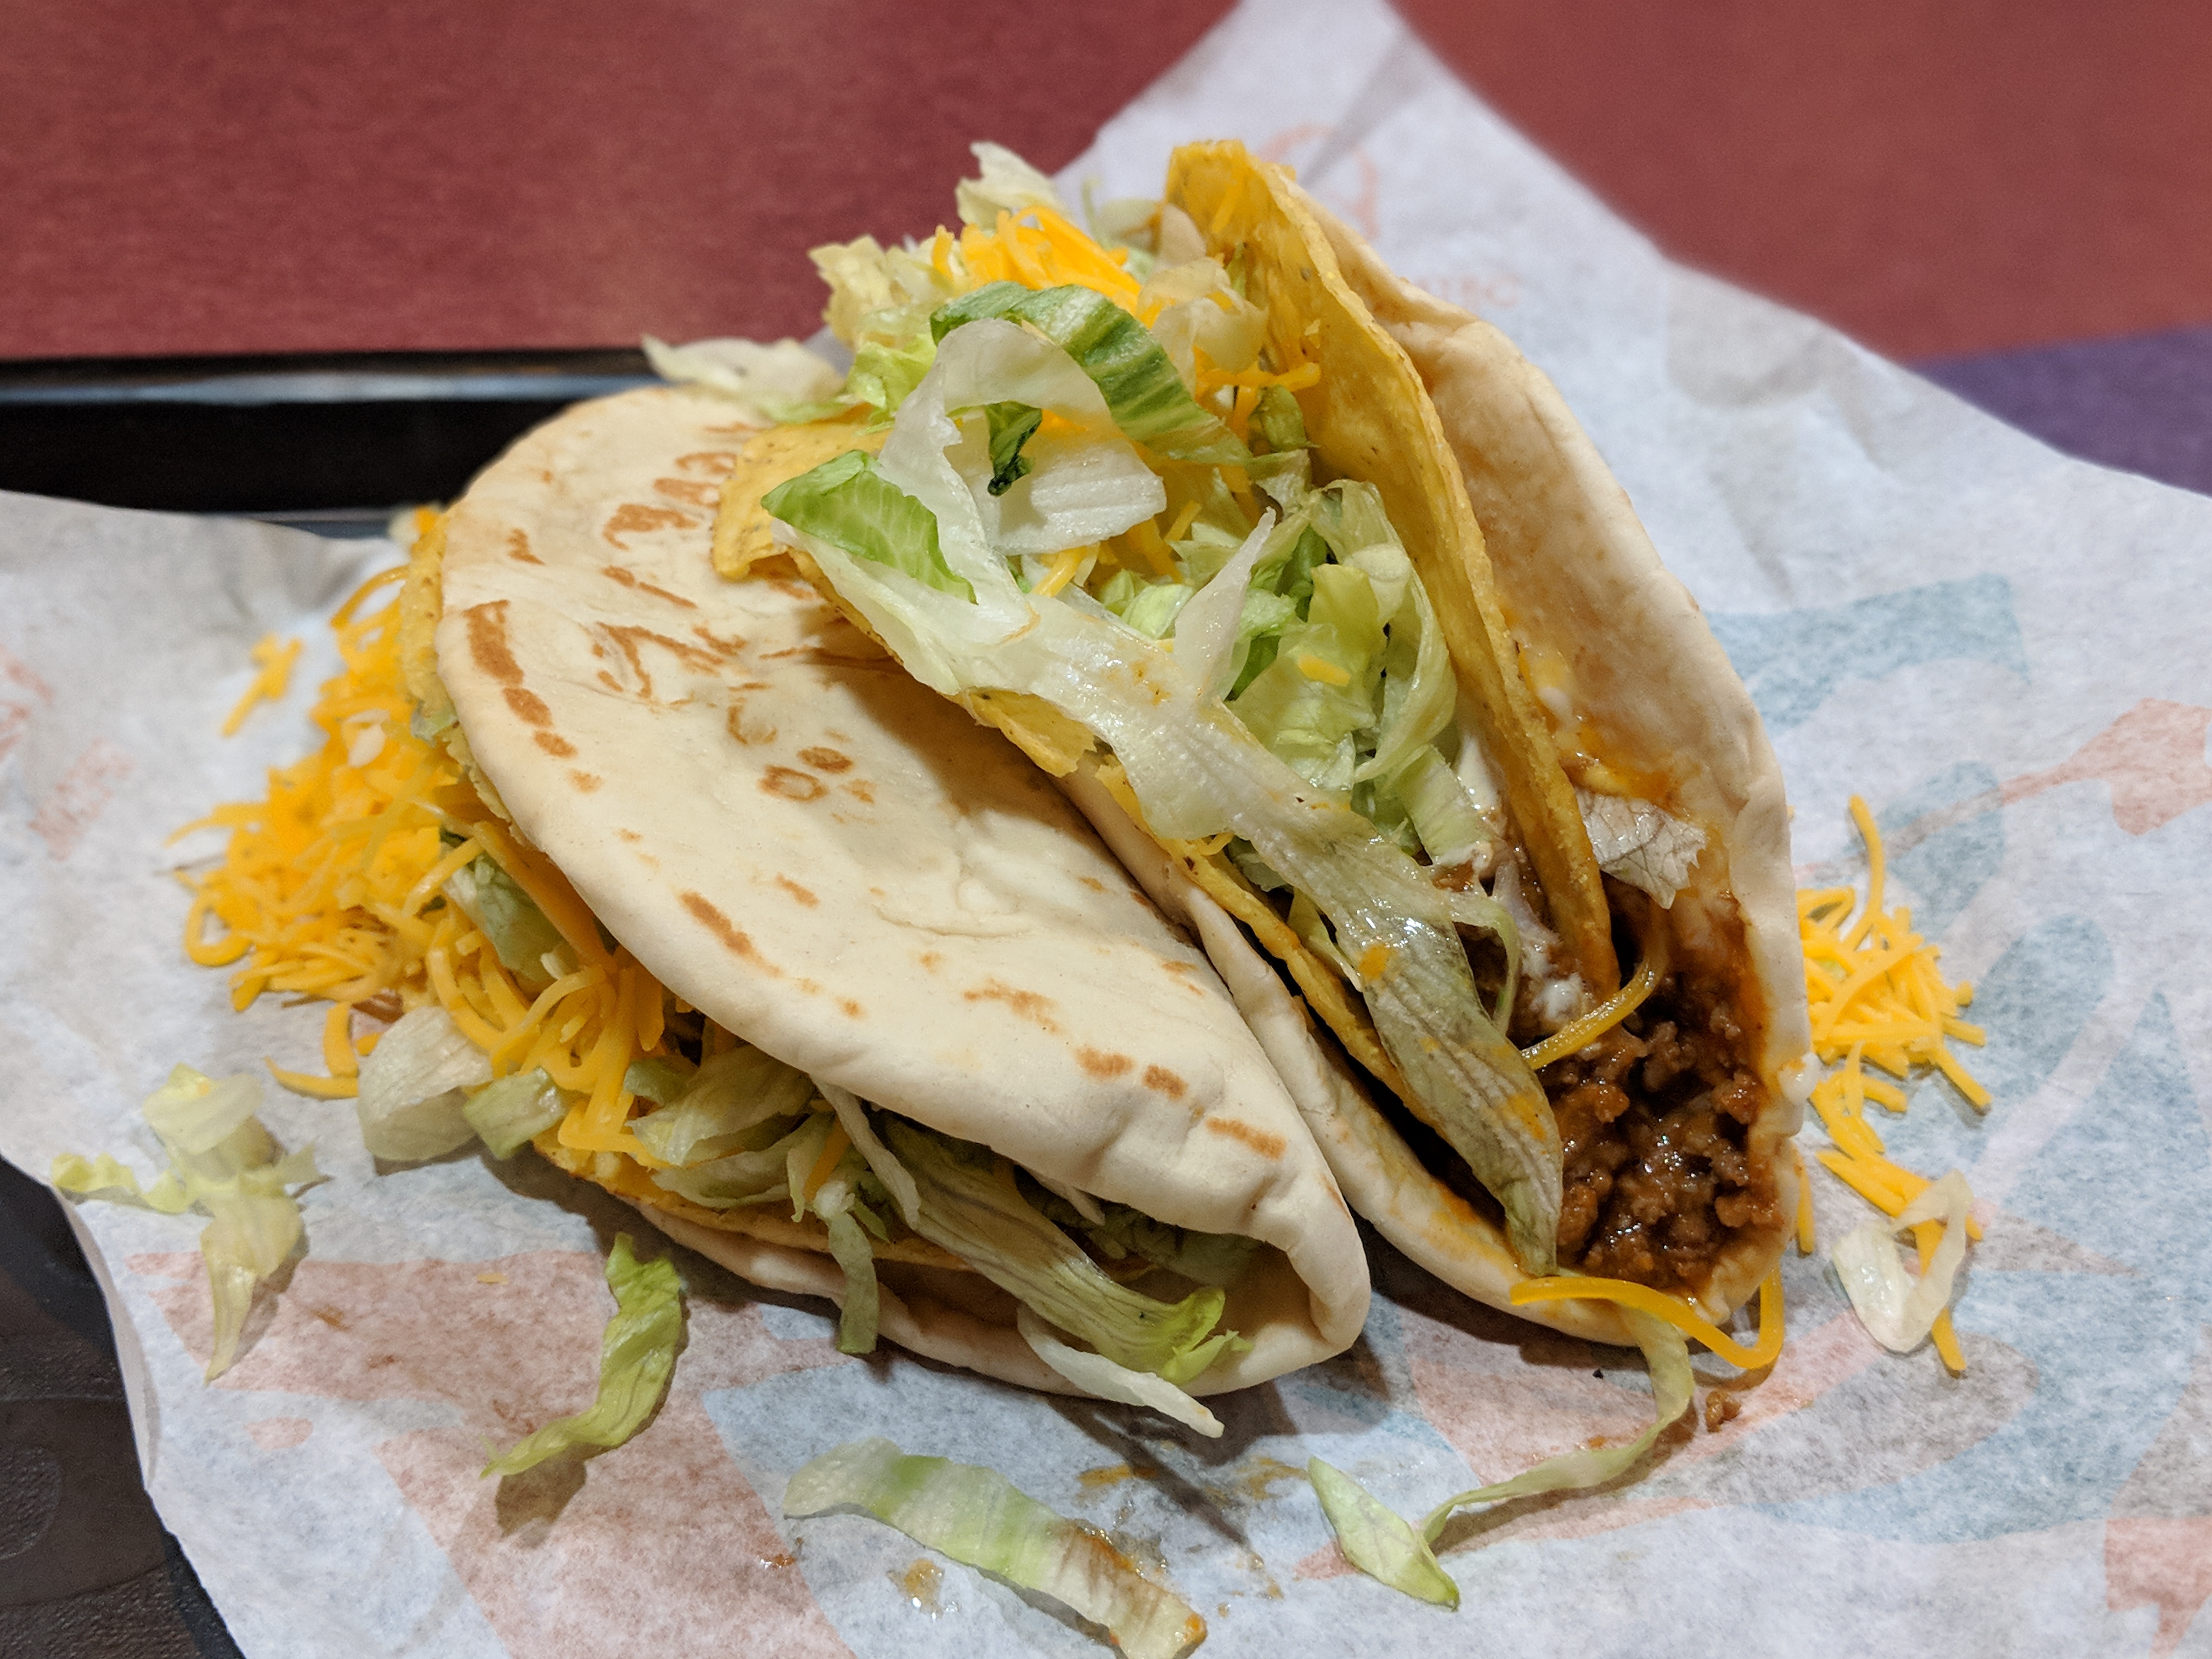 taco-bell-comes-up-short-in-noble-effort-to-improve-upon-the-cheesy